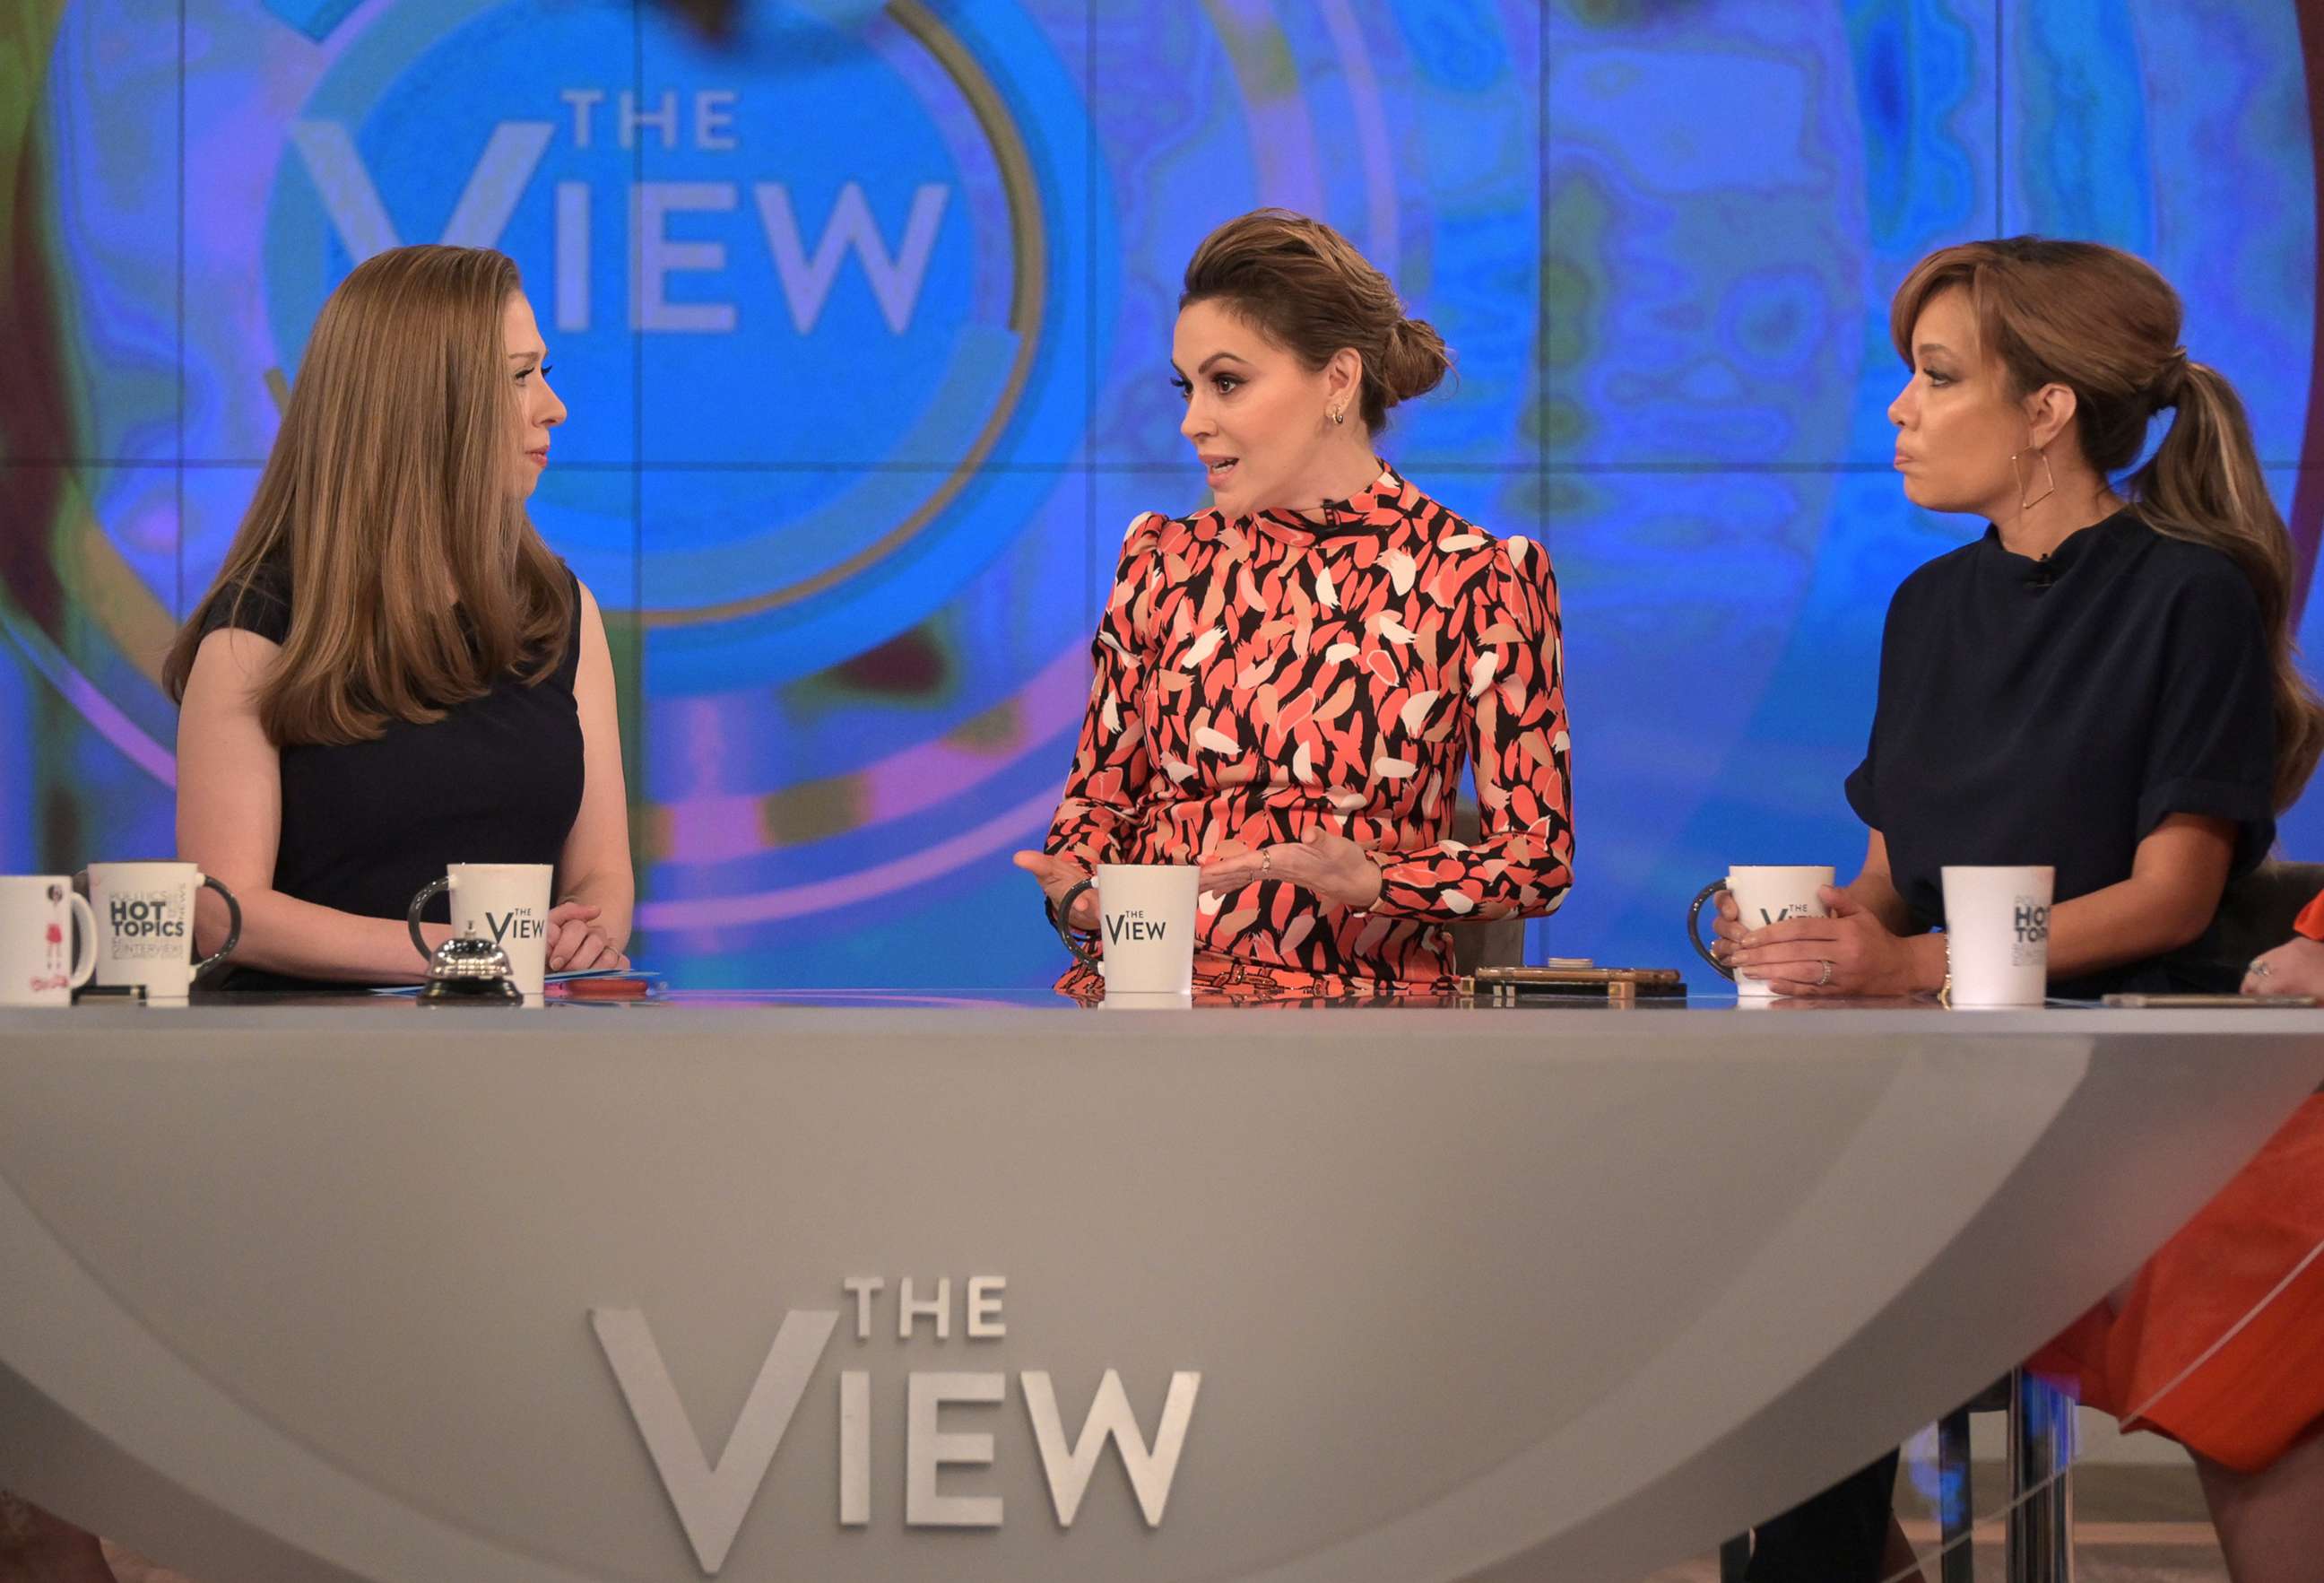 PHOTO: Actress Alyssa Milano opens up on "The View" about why she decided to share her #MeToo story 25 years after the alleged incident Wednesday, Oct. 16, 2019.